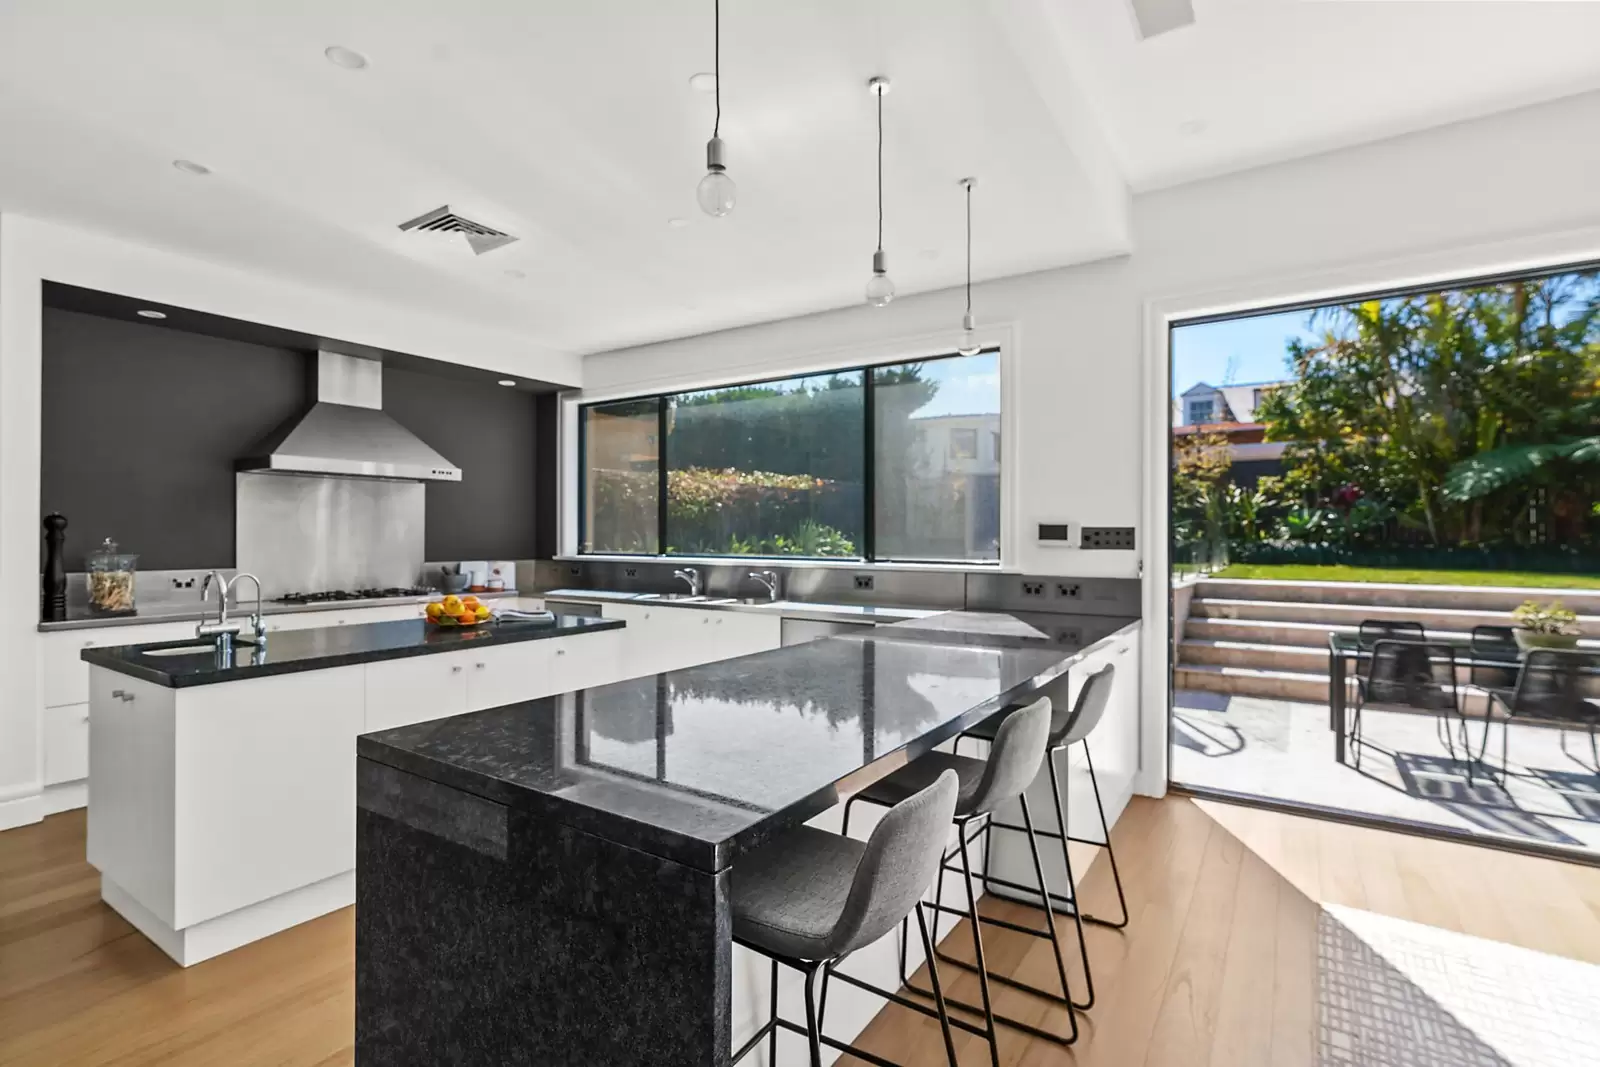 Photo #10: 7 Dalley Avenue, Vaucluse - Sold by Sydney Sotheby's International Realty